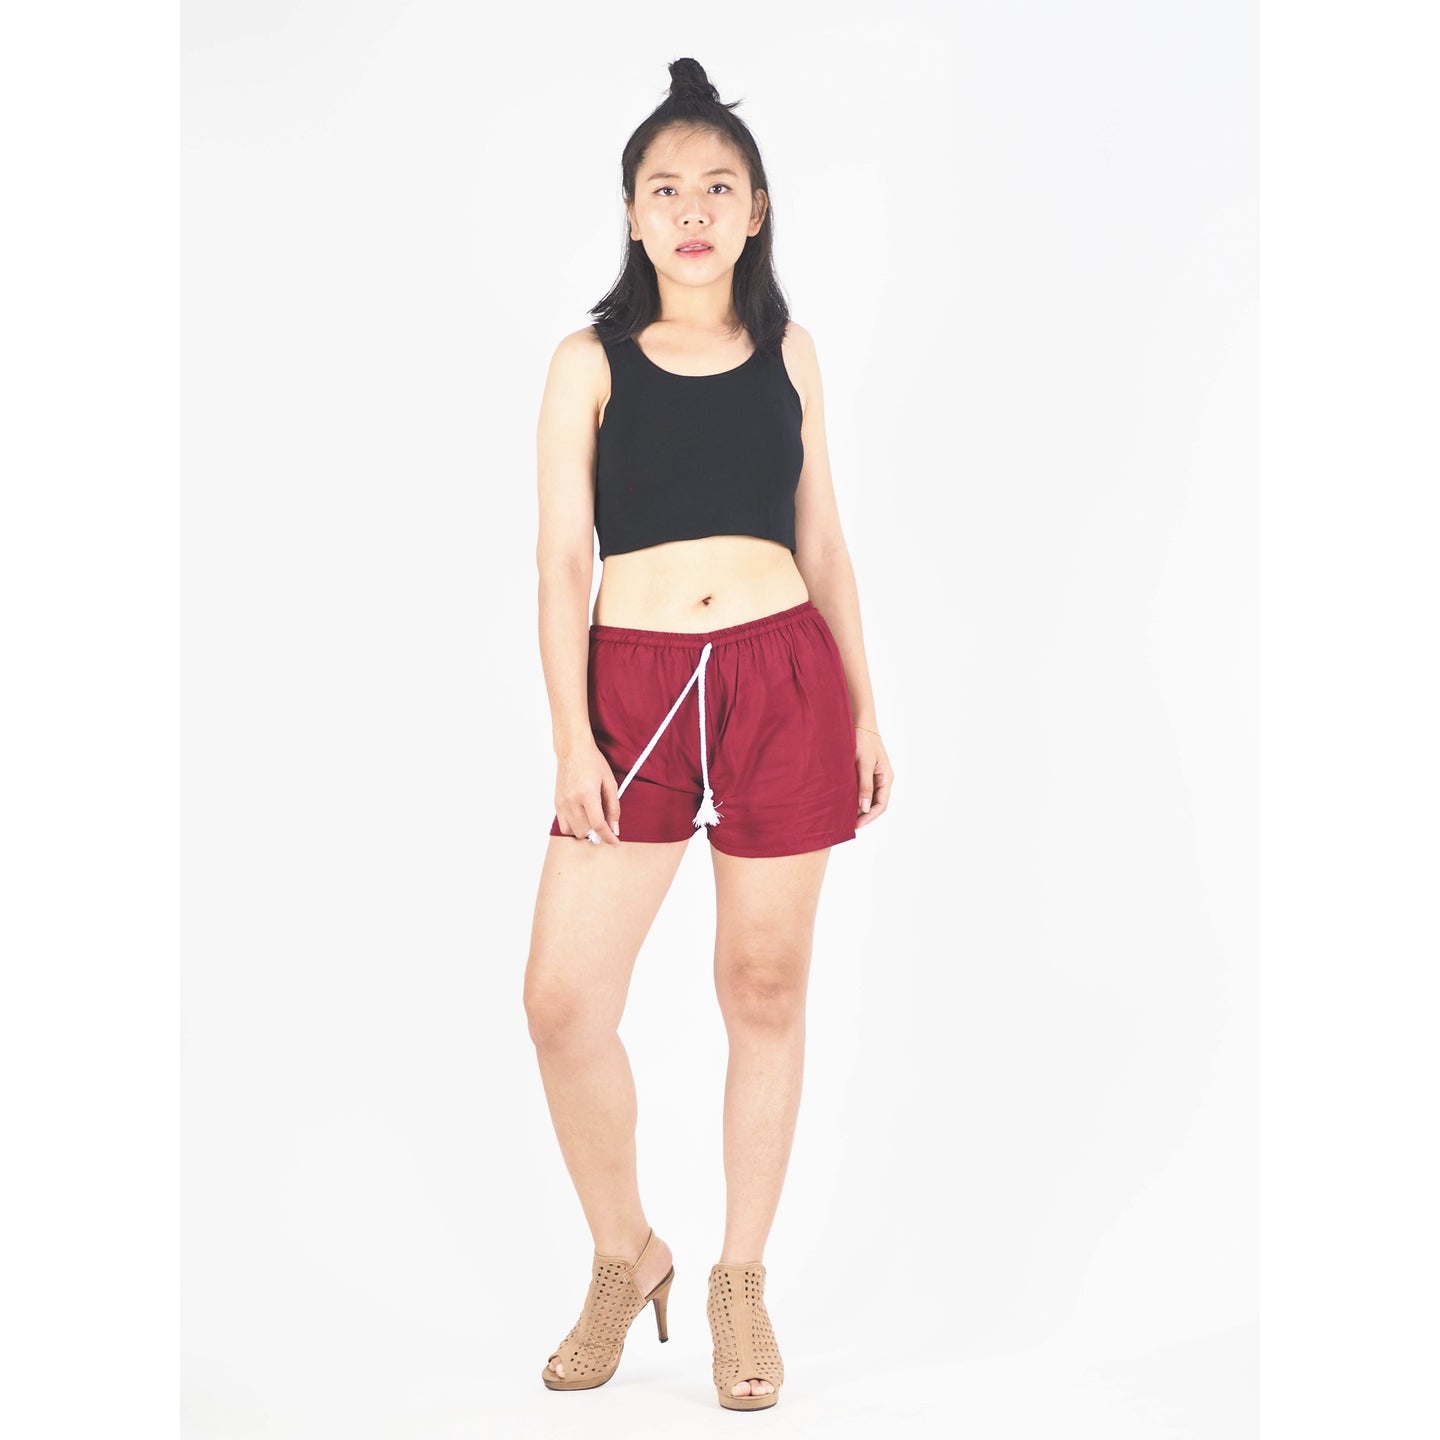 Solid Color Women's Shorts Drawstring Genie Pants in Burgundy PP0142 020000 15